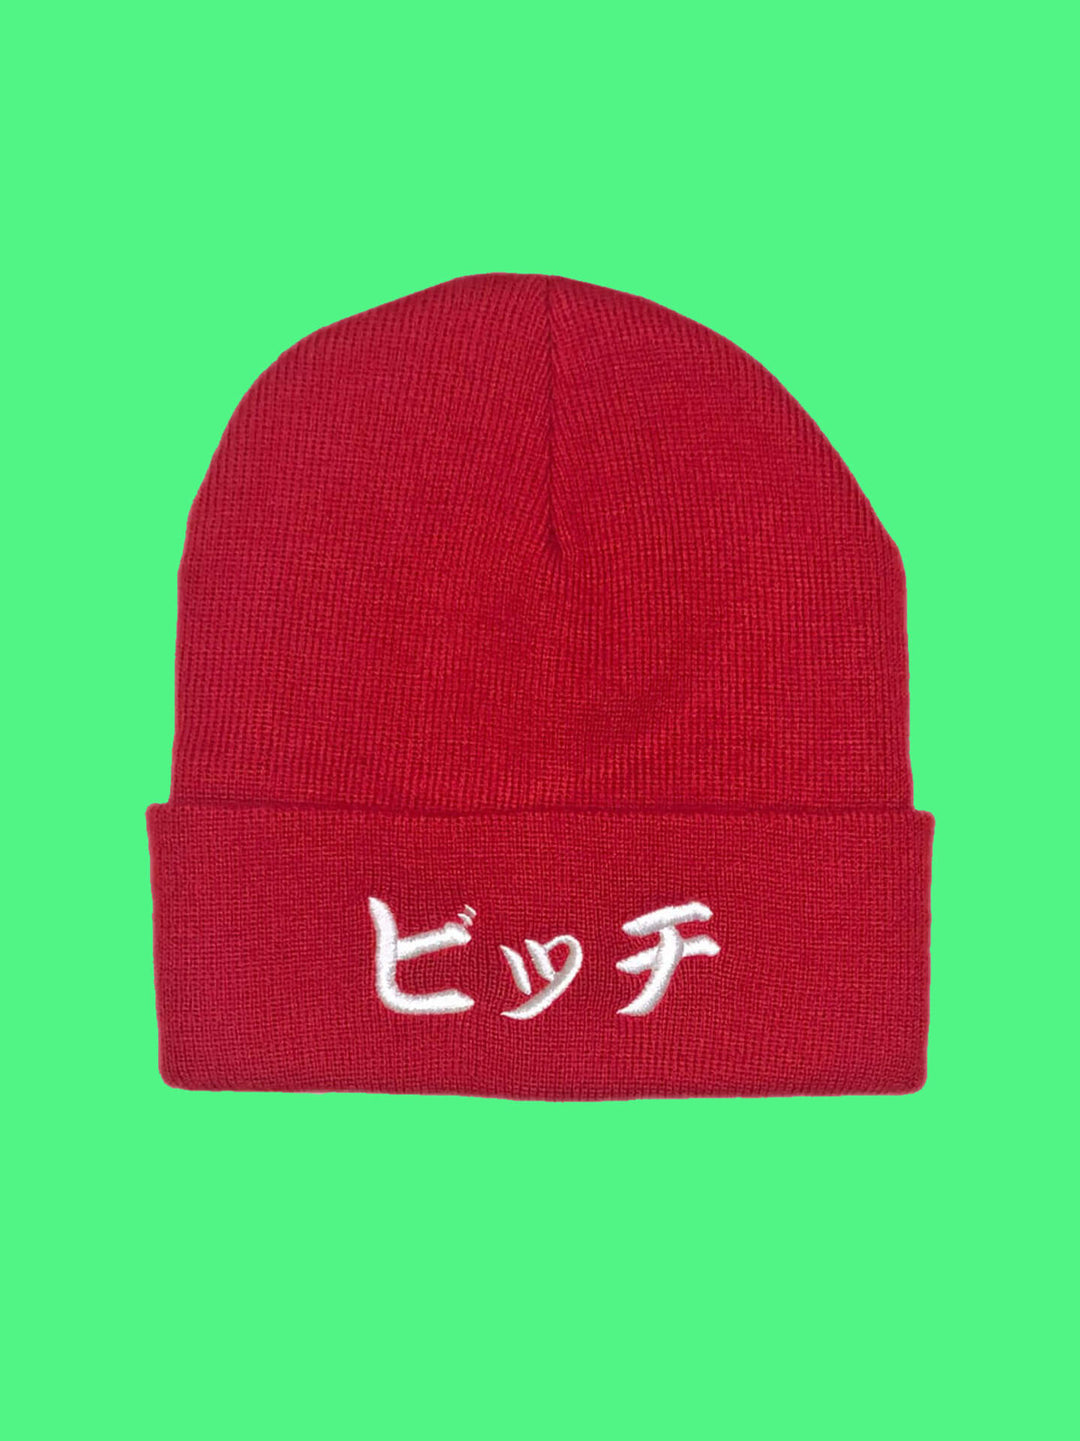 Japanese bad bitch embroidered red streetwear beanie. 